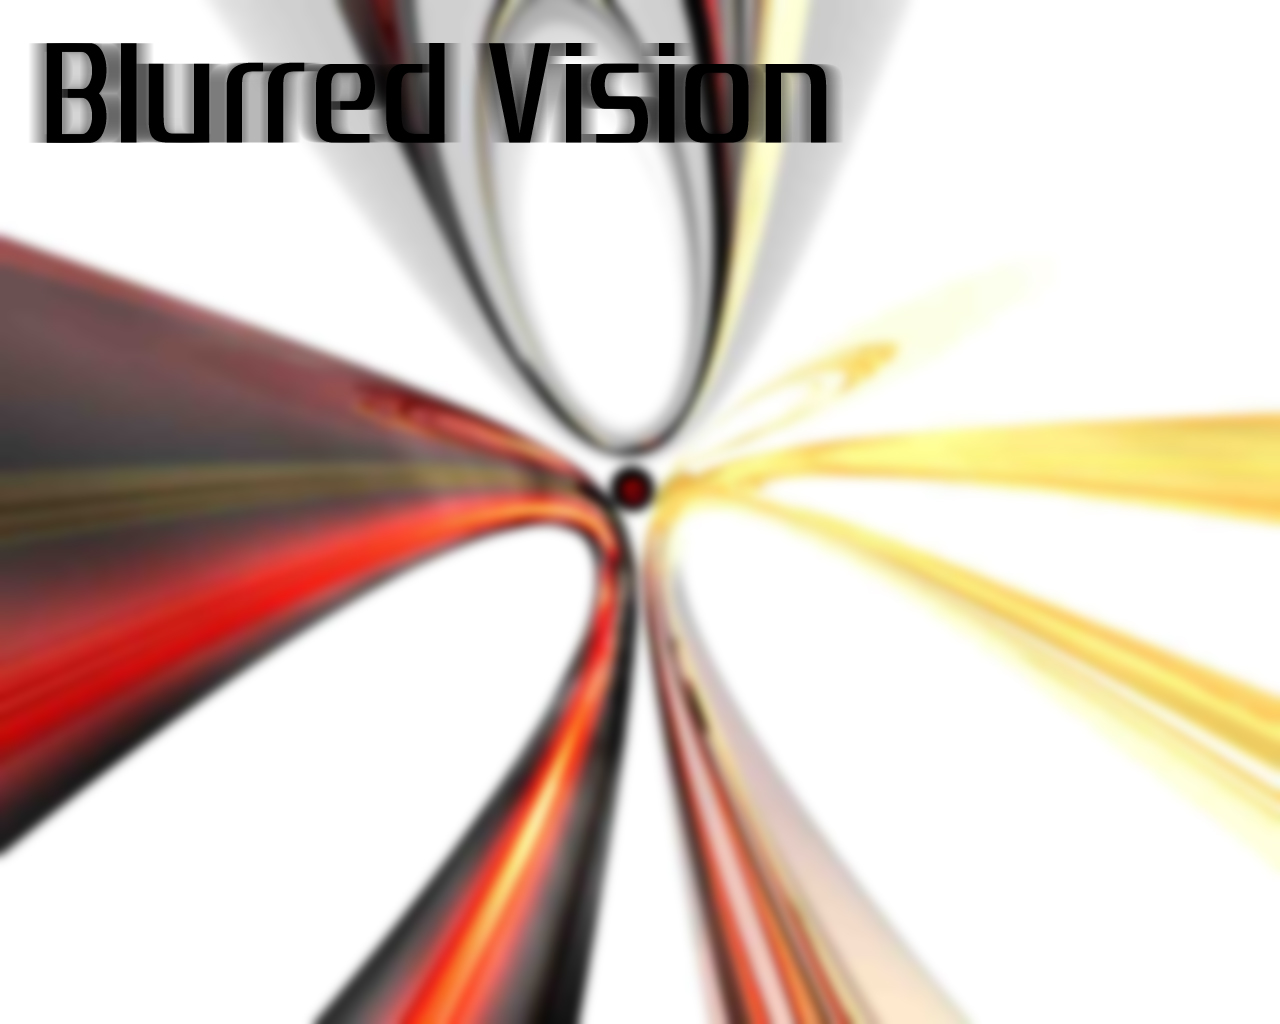 blurred vision clipart - photo #32